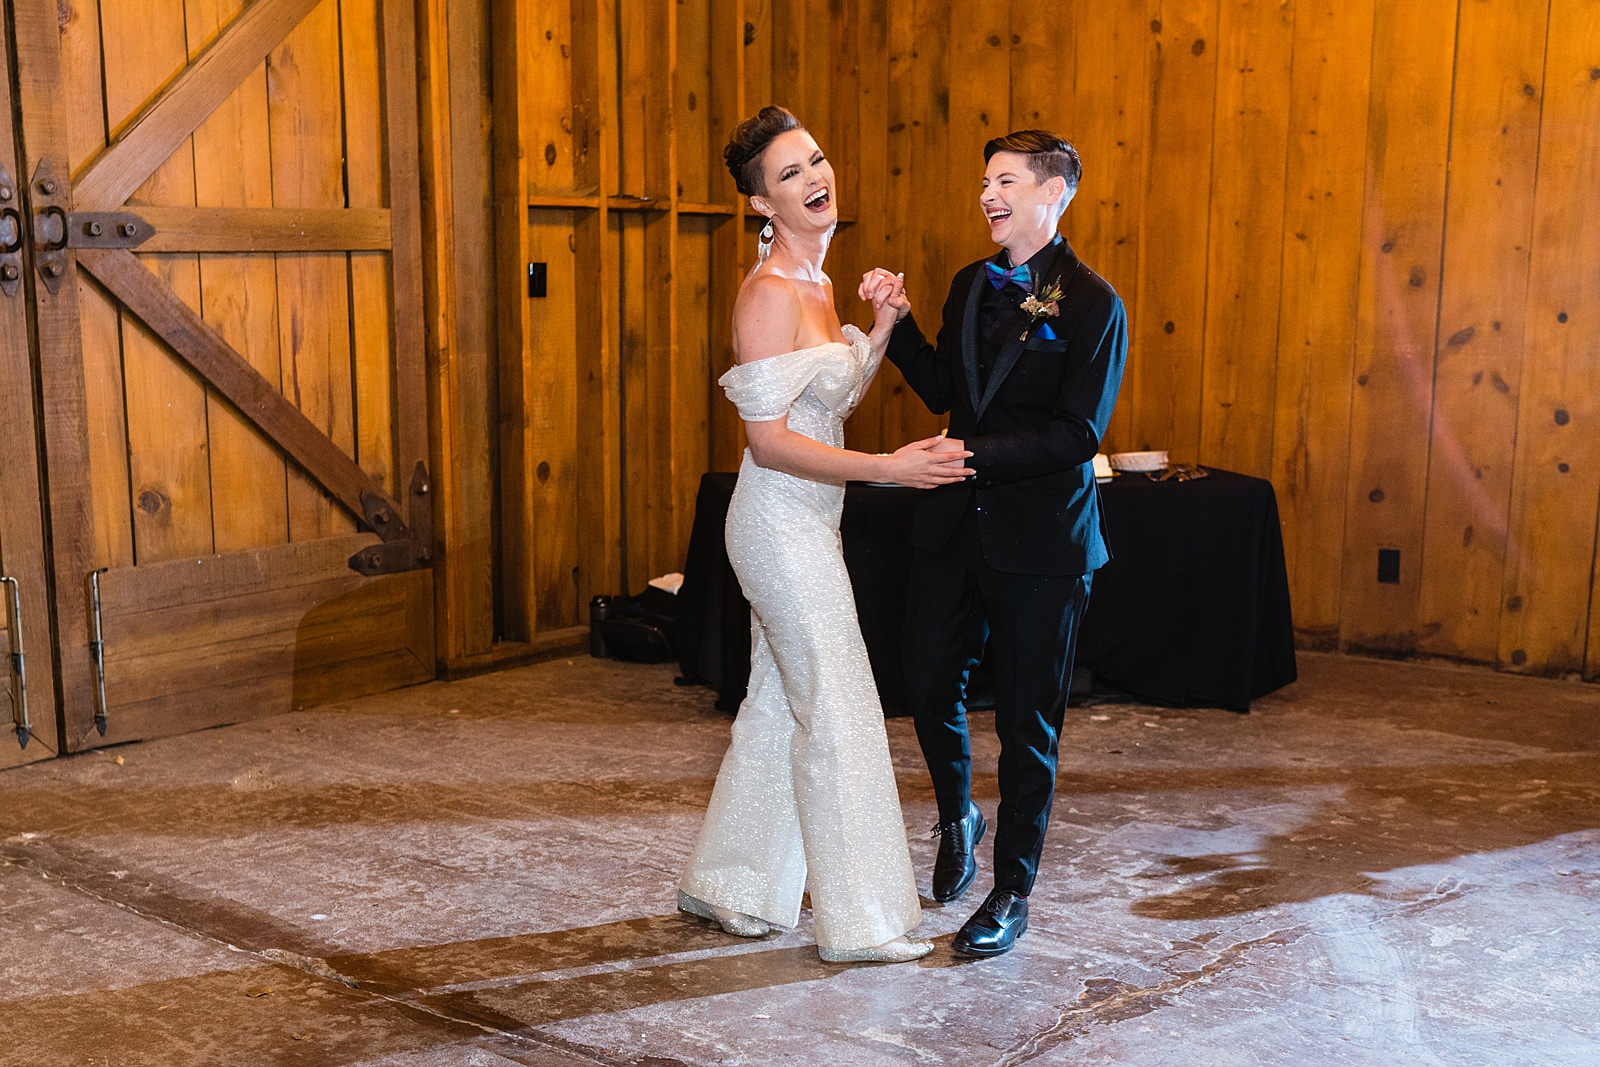 Bride changes out of wedding dress into wedding suit before first dance at Mortimer Farms wedding reception by Prescott wedding photographer PMA Photography